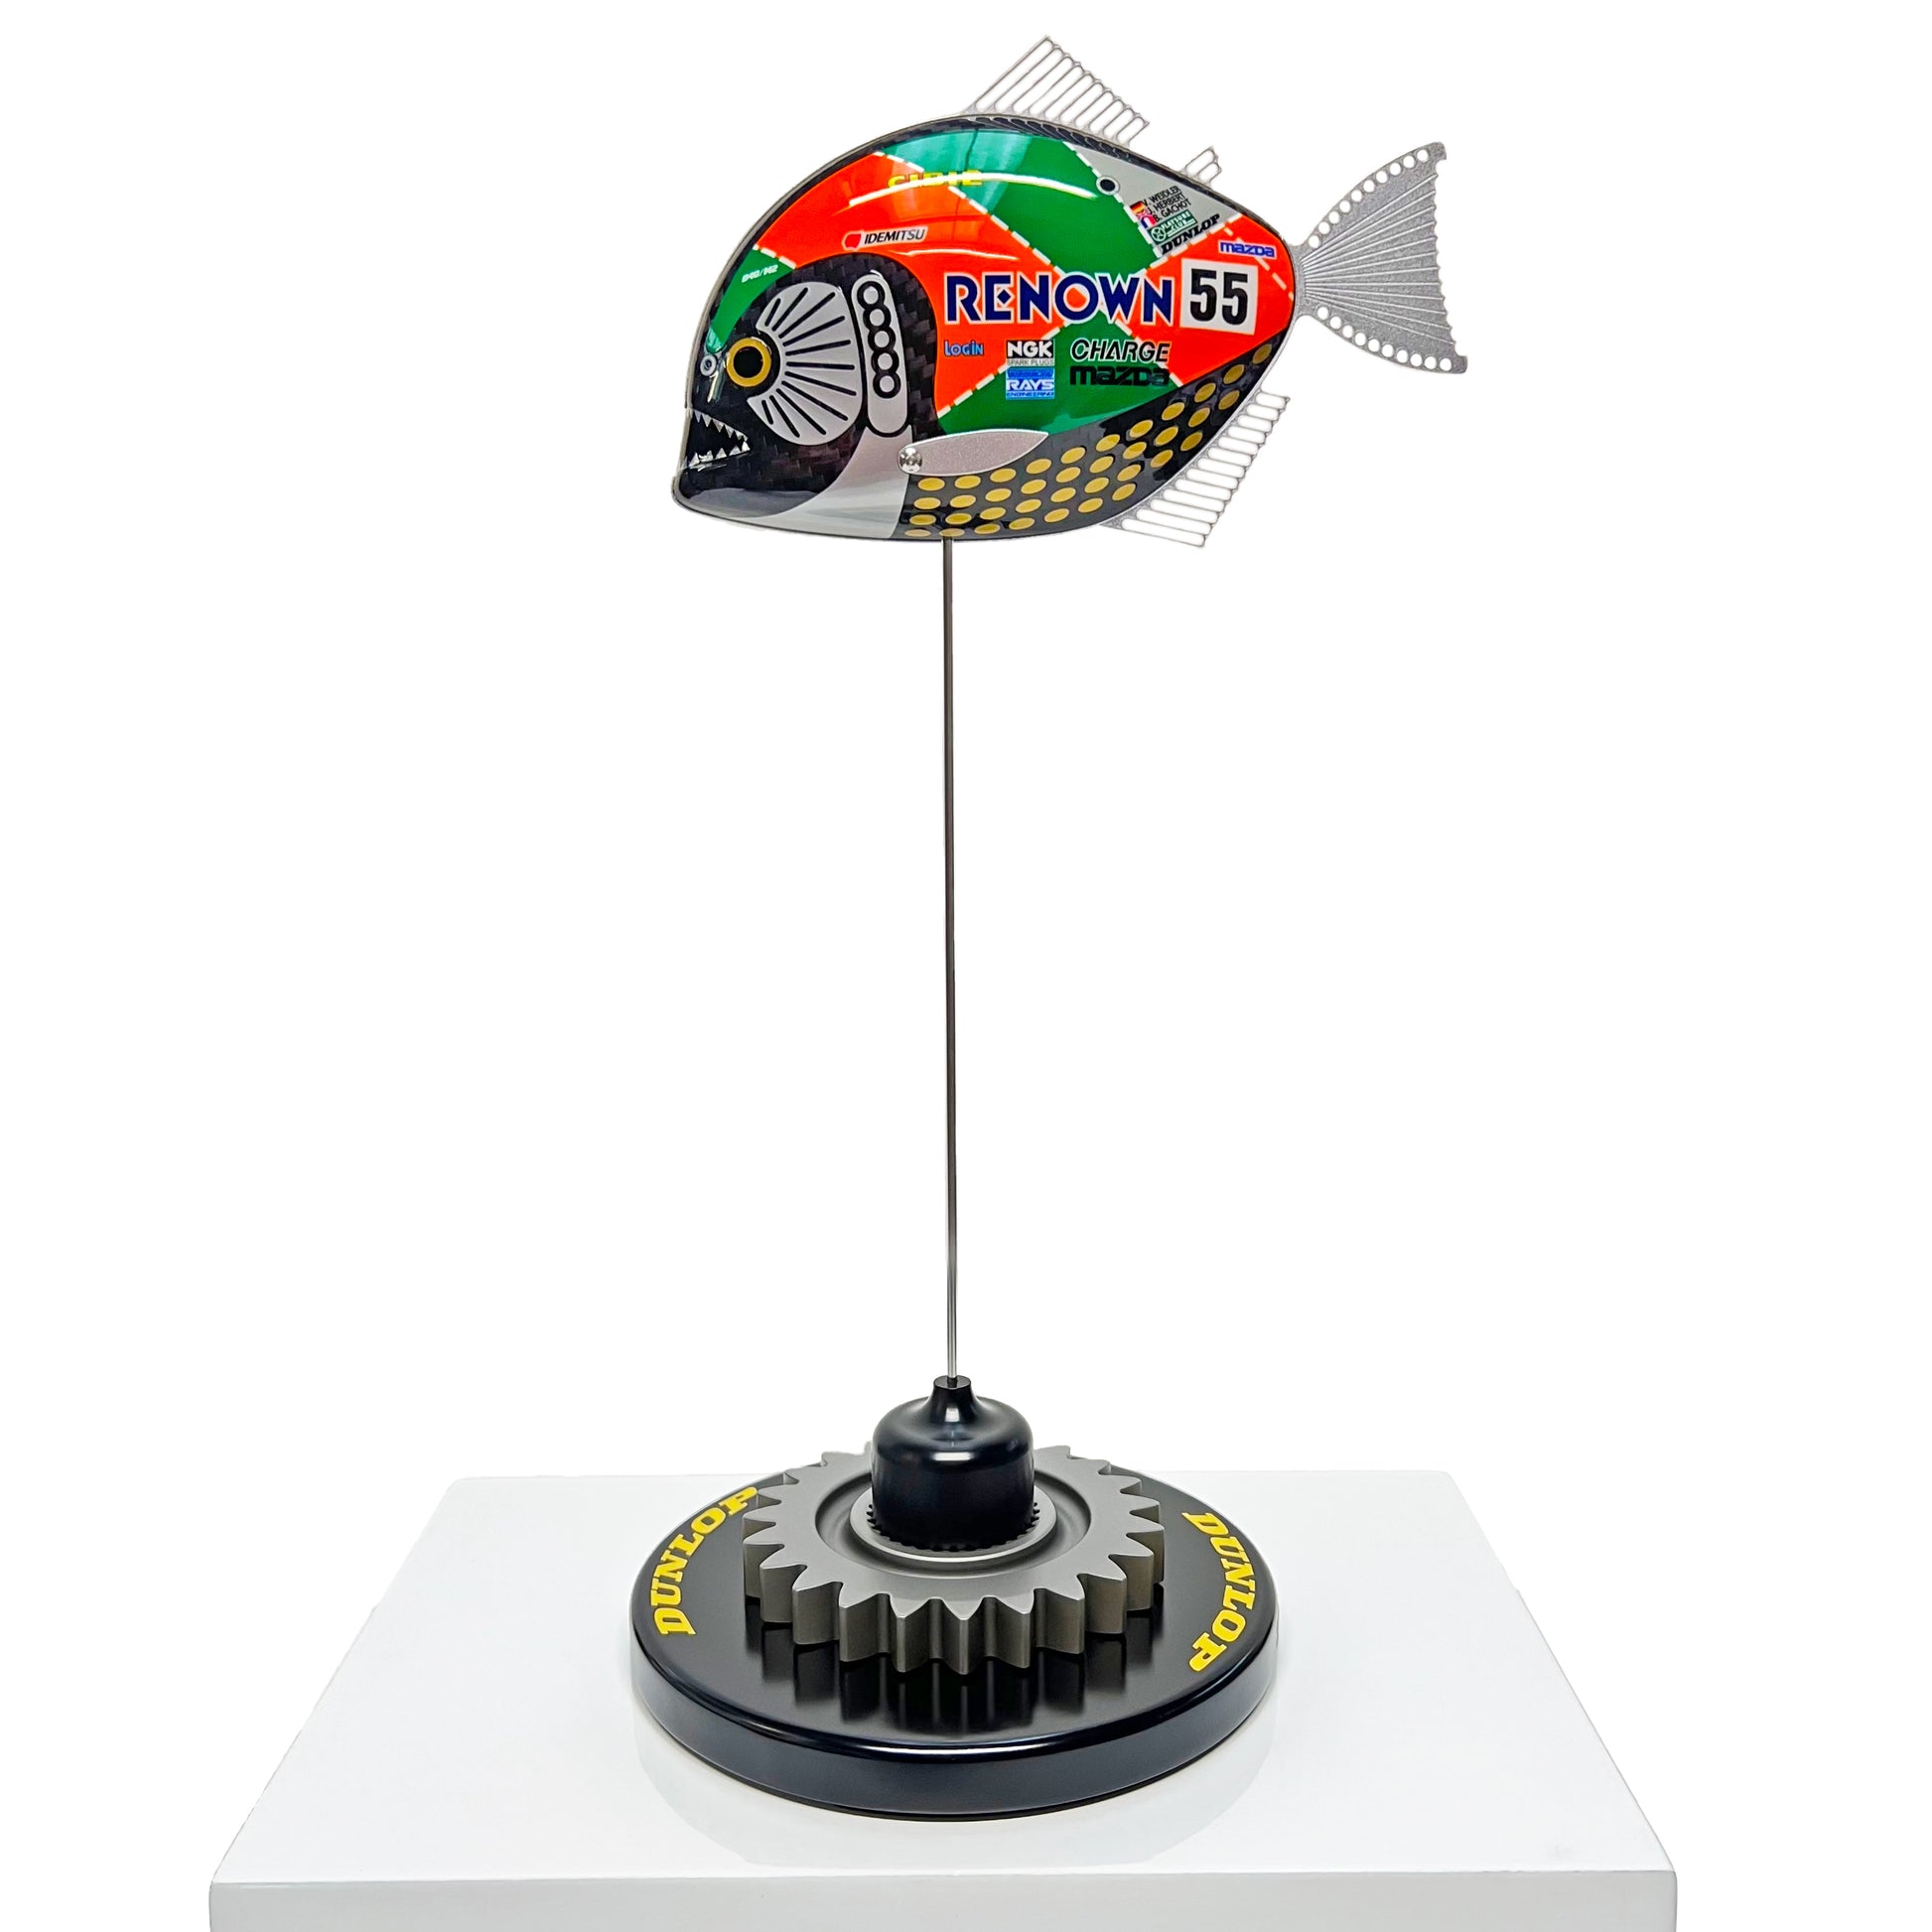 Carbon fibre Piranha sculpture with Mazda 787B livery on a black base with F1 gear